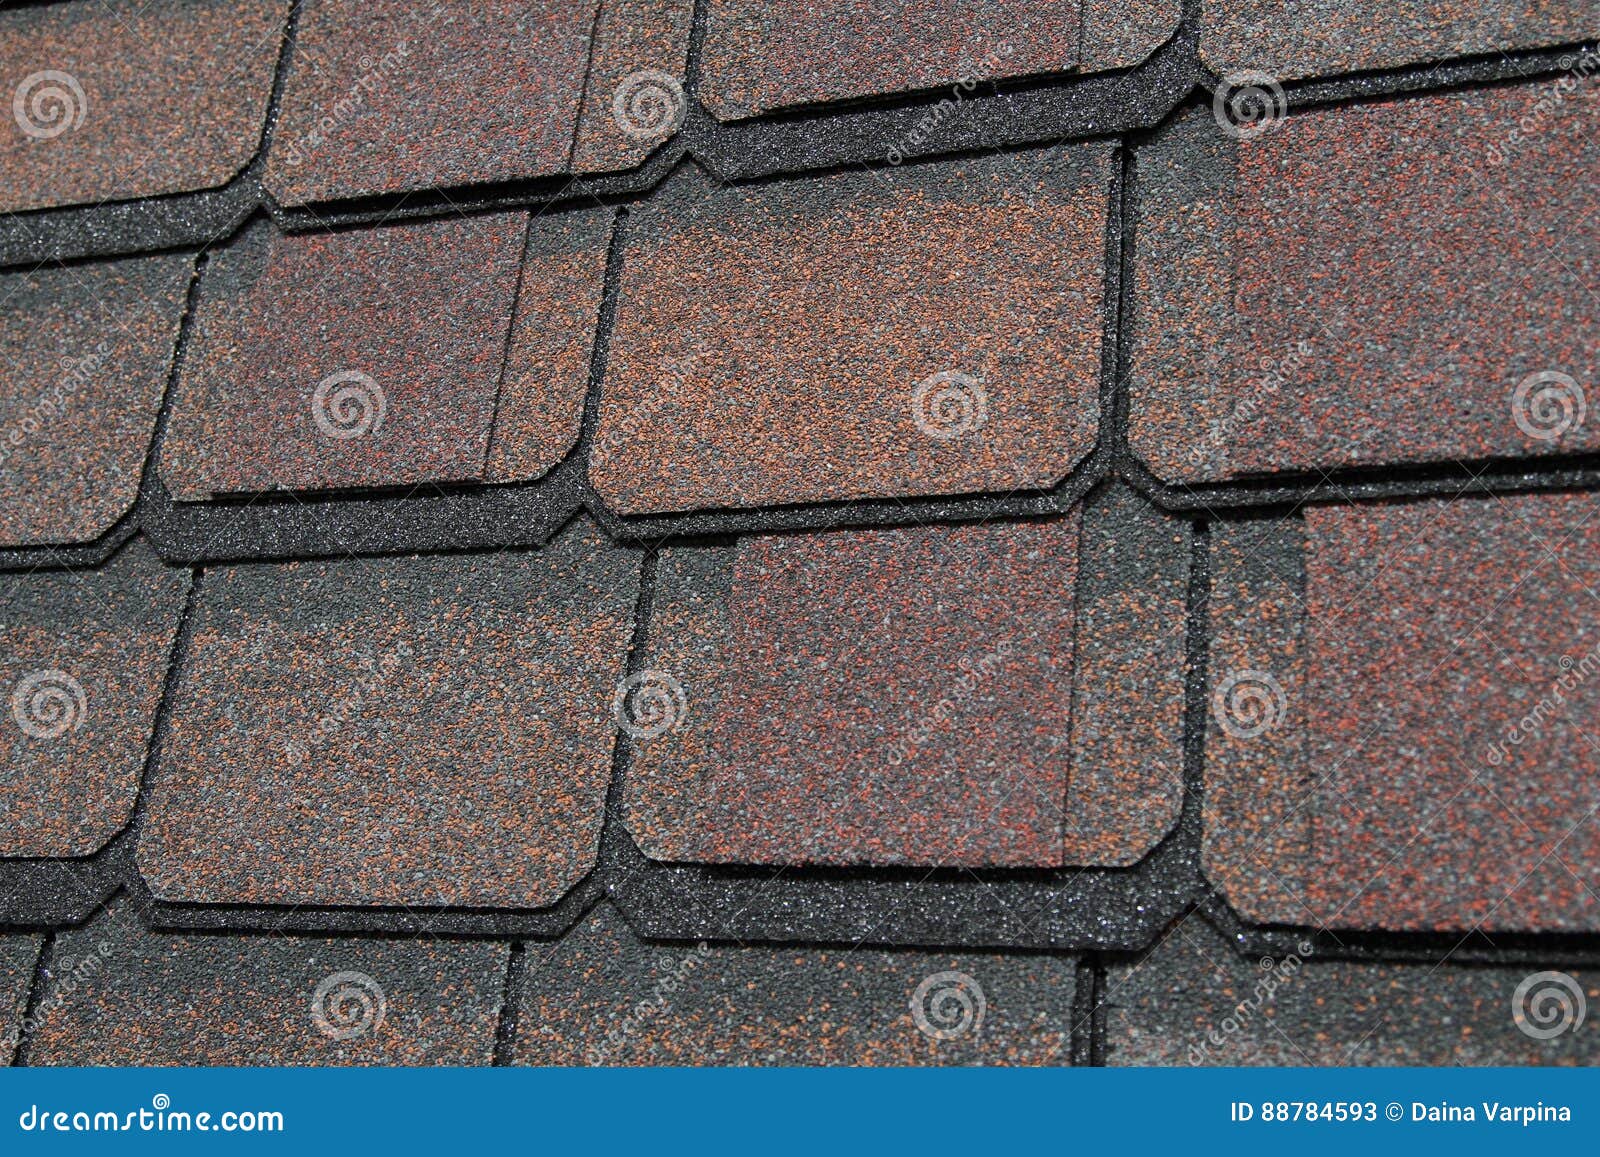 Rubber Roof Tiles Stock Image Image Of Material